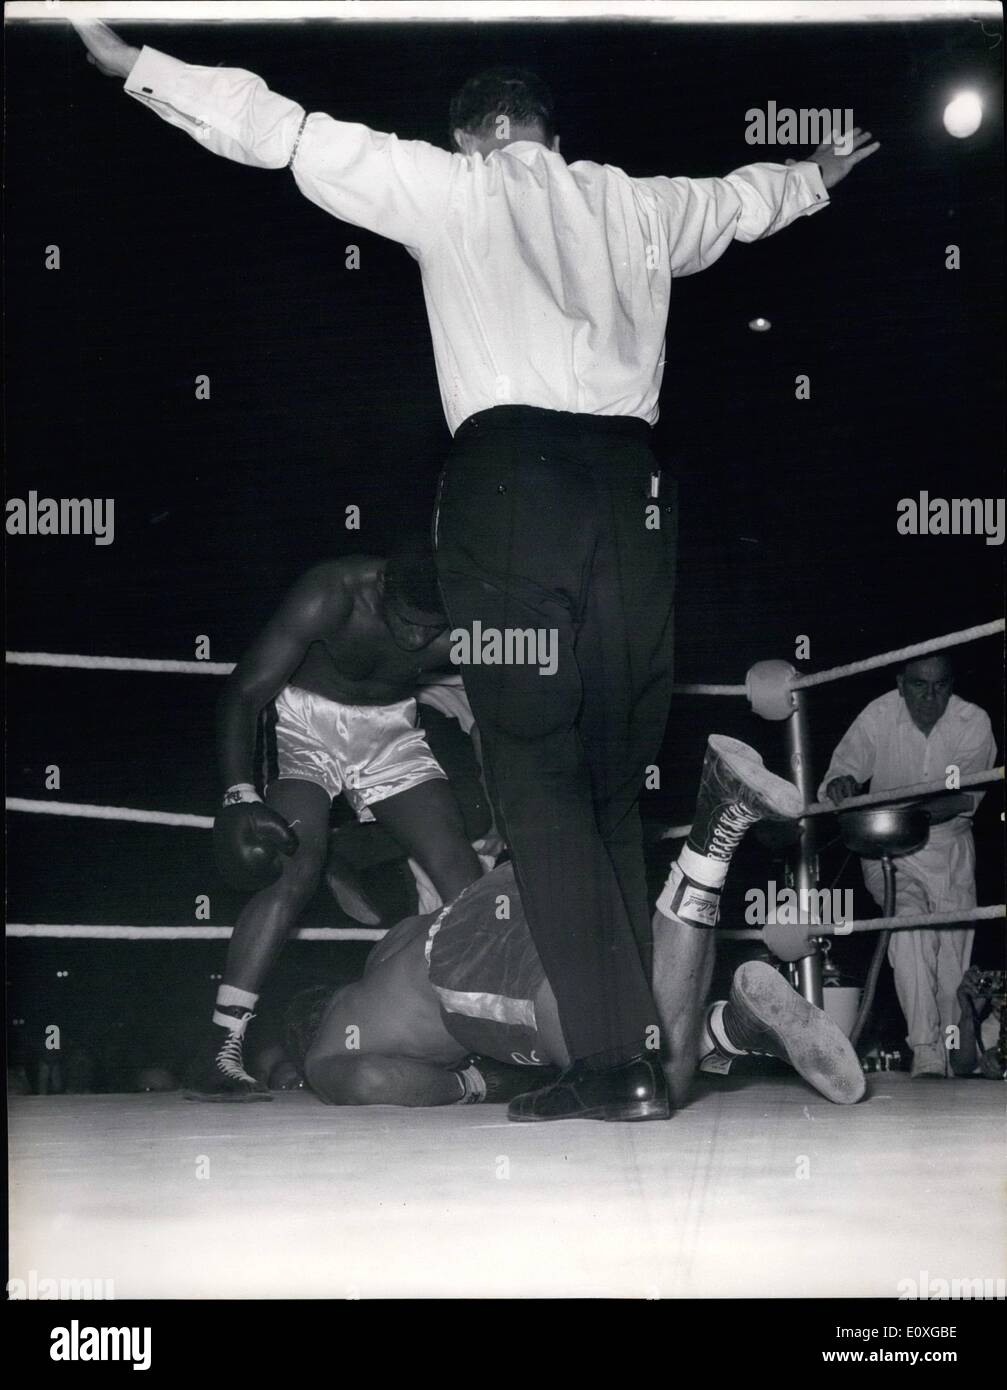 Sep. 09, 1966 - Knock Out: Former World Heavyweight Champion Floyd Patterson of America stand over British and Empire Heavyweight champion Henry cooper as Referee Wally Thom Counts out the fallen British Champion after 2 mins. 20 seconds of the fourth round of their scheduled 10-round contest at Empire Pool, Wembley this evening. Stock Photo